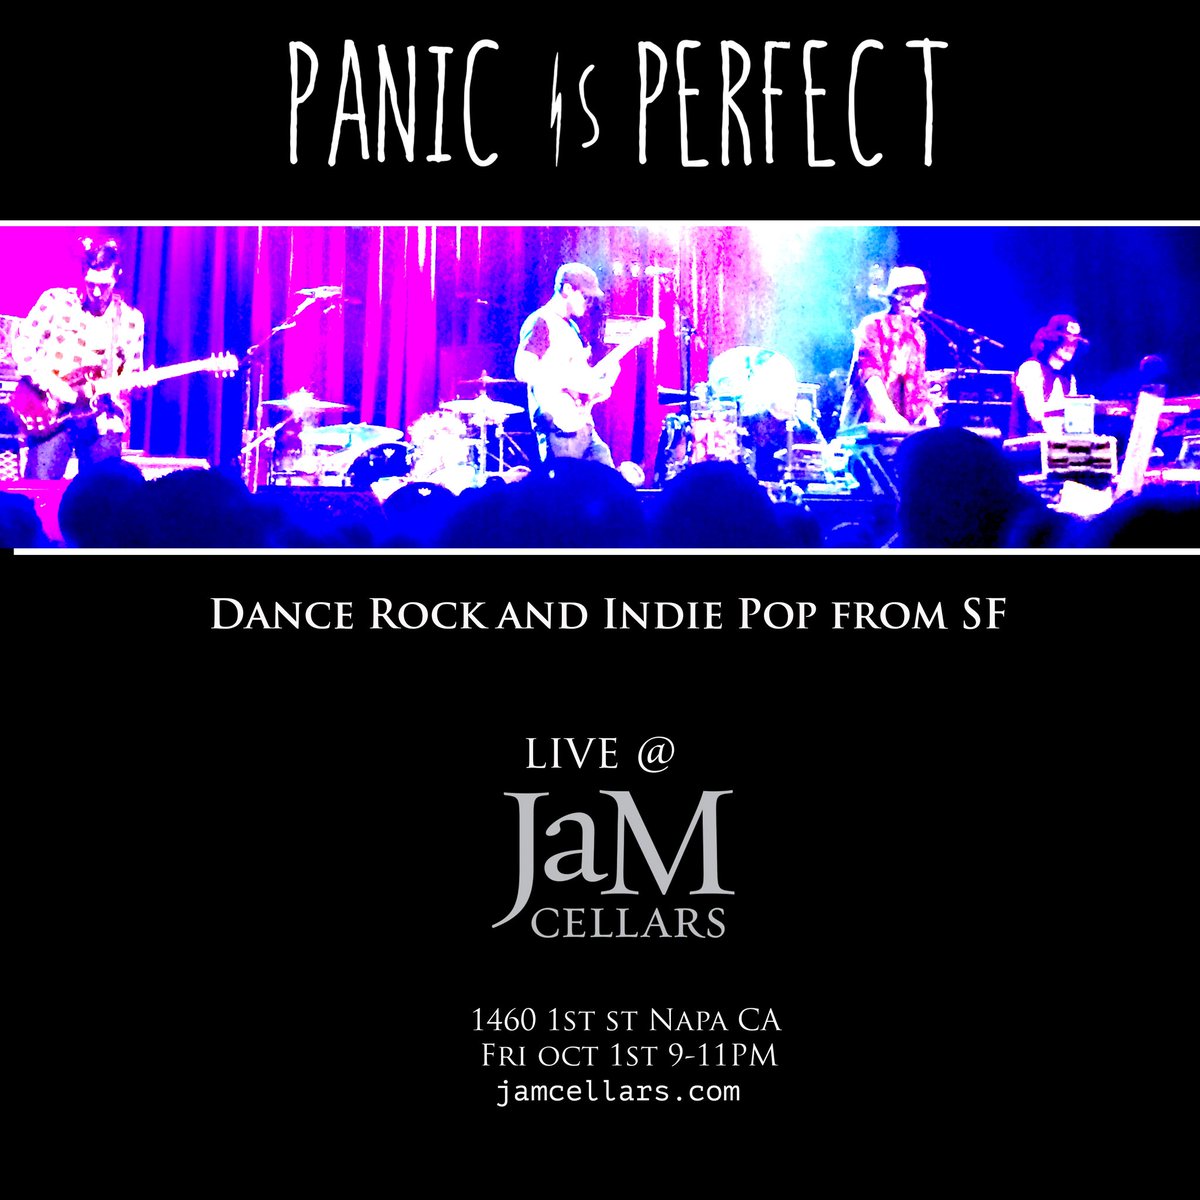 This Friday we will be playing at @Jamcellars in Napa. We are on from 9 to 11pm. Hope to see you there!
jamcellars.com/Visit/JaMSessi…

#jamcellars #liveperformance #newmusic #panicisperfect #musicevents #band #livemusic #newrelease #napaevents #napamusic #napaconcerts #napalife #napa